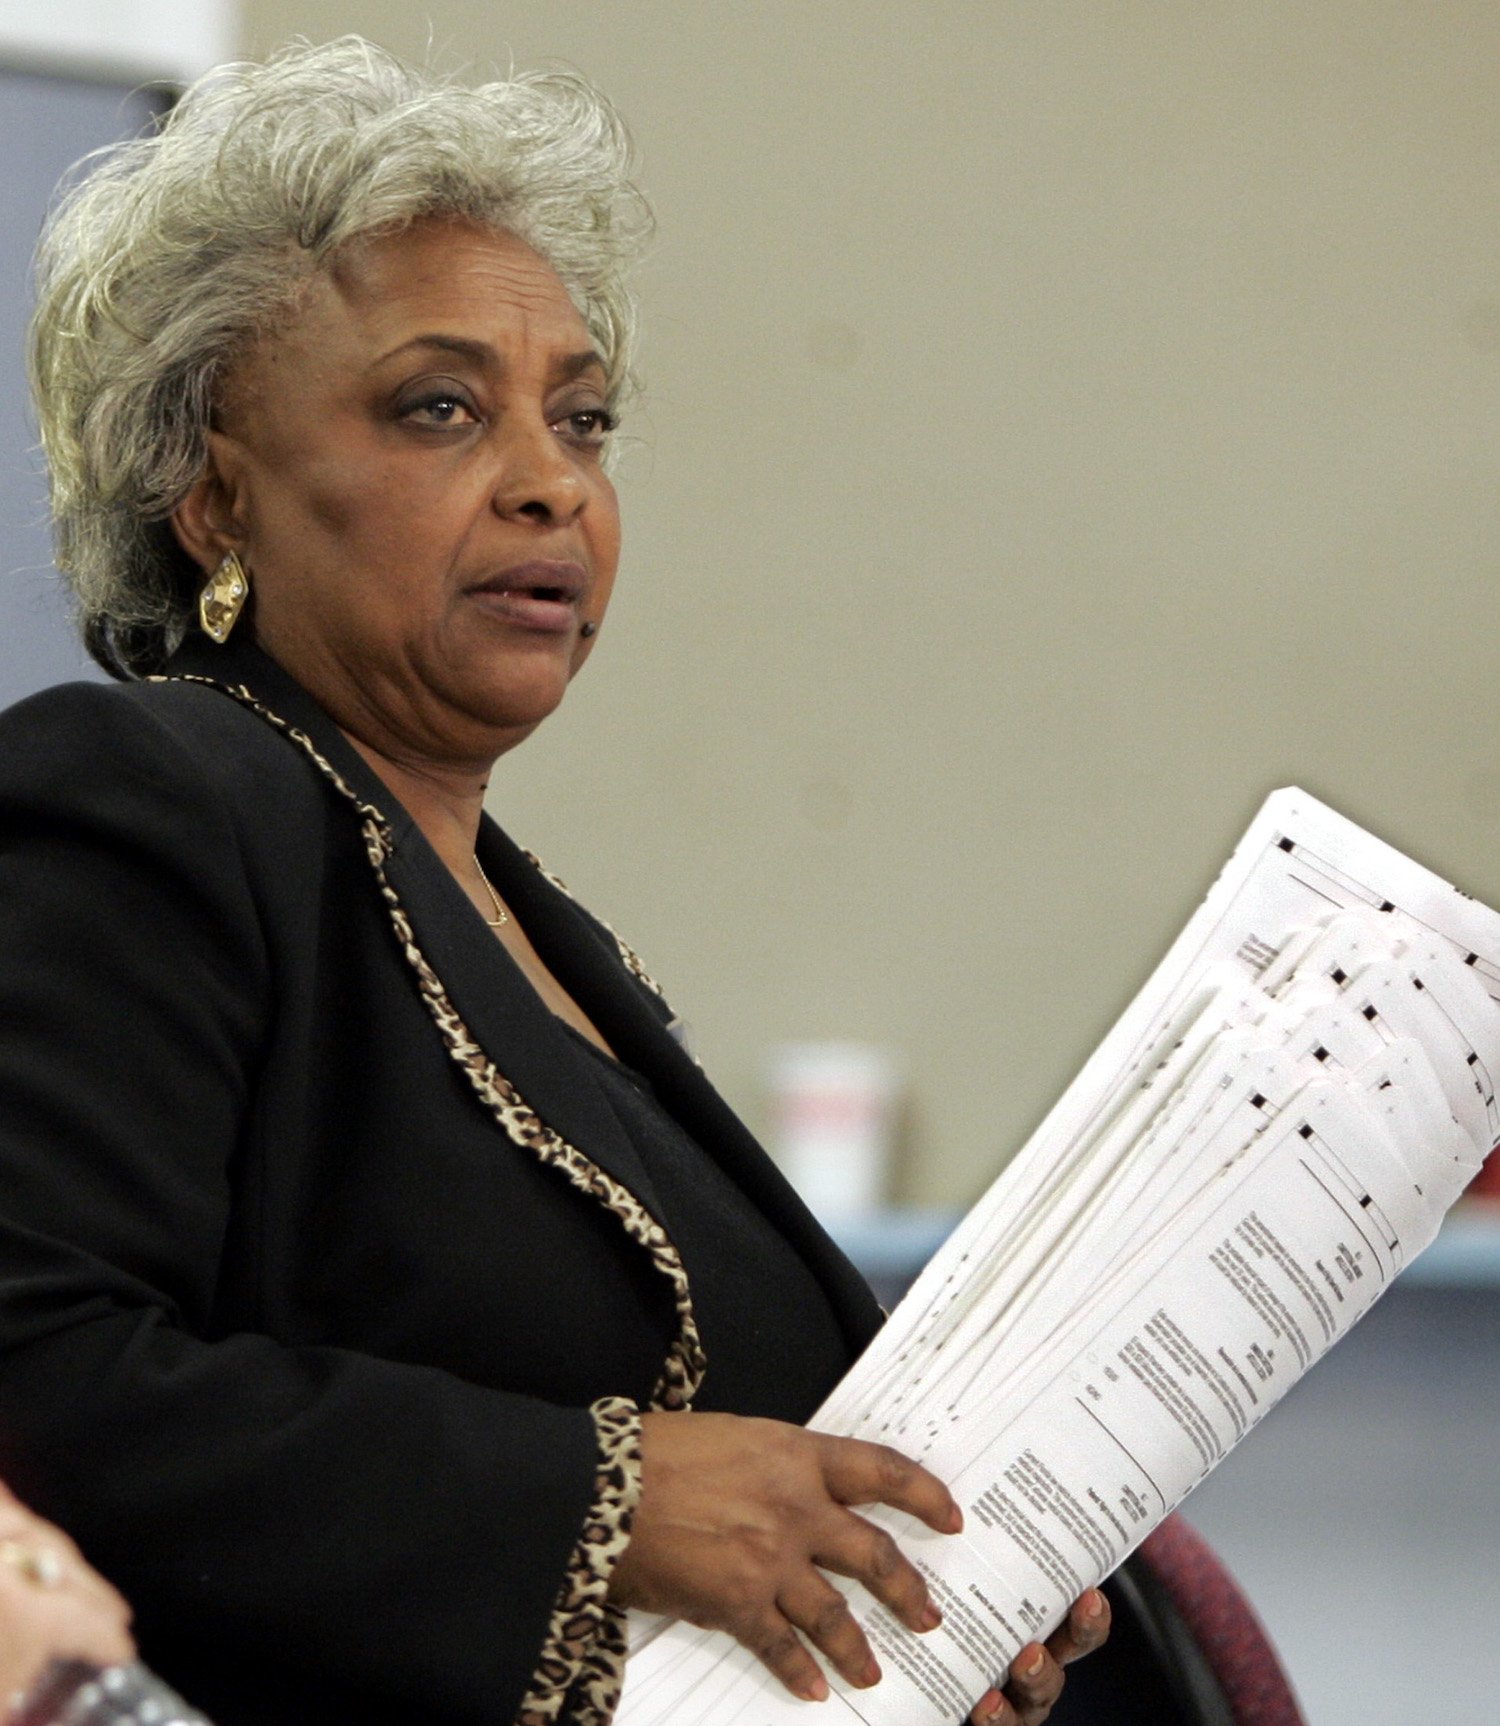 Supervisor of elections for Broward County Dr. Brenda C. Snipes holds a group of overvote ballots at the Broward county election equipment center in Ft Lauderdale, Florida, November 2, 2004. Overvotes are absentee ballots that have a vote for more than one candidate in a category. REUTERS/Gary I Rothstein